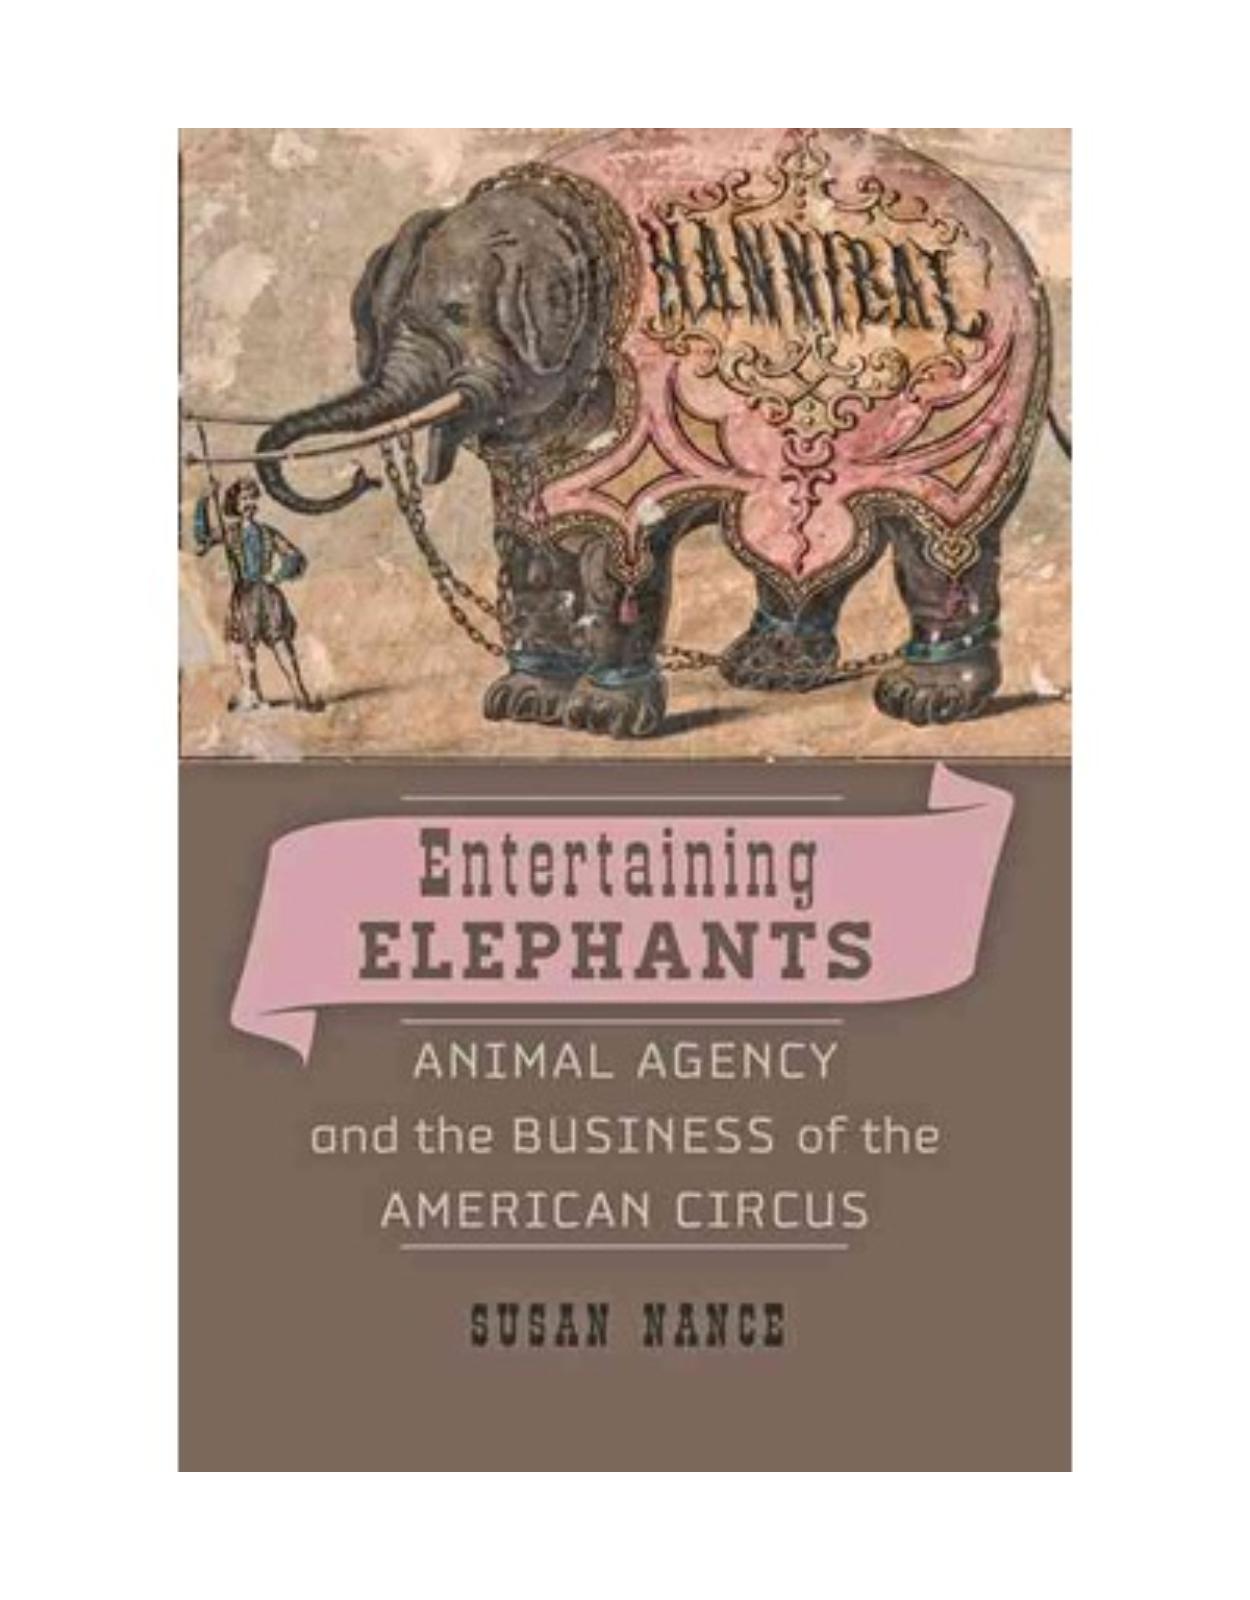 Entertaining Elephants. Animal Agency and the Business of the American Circus